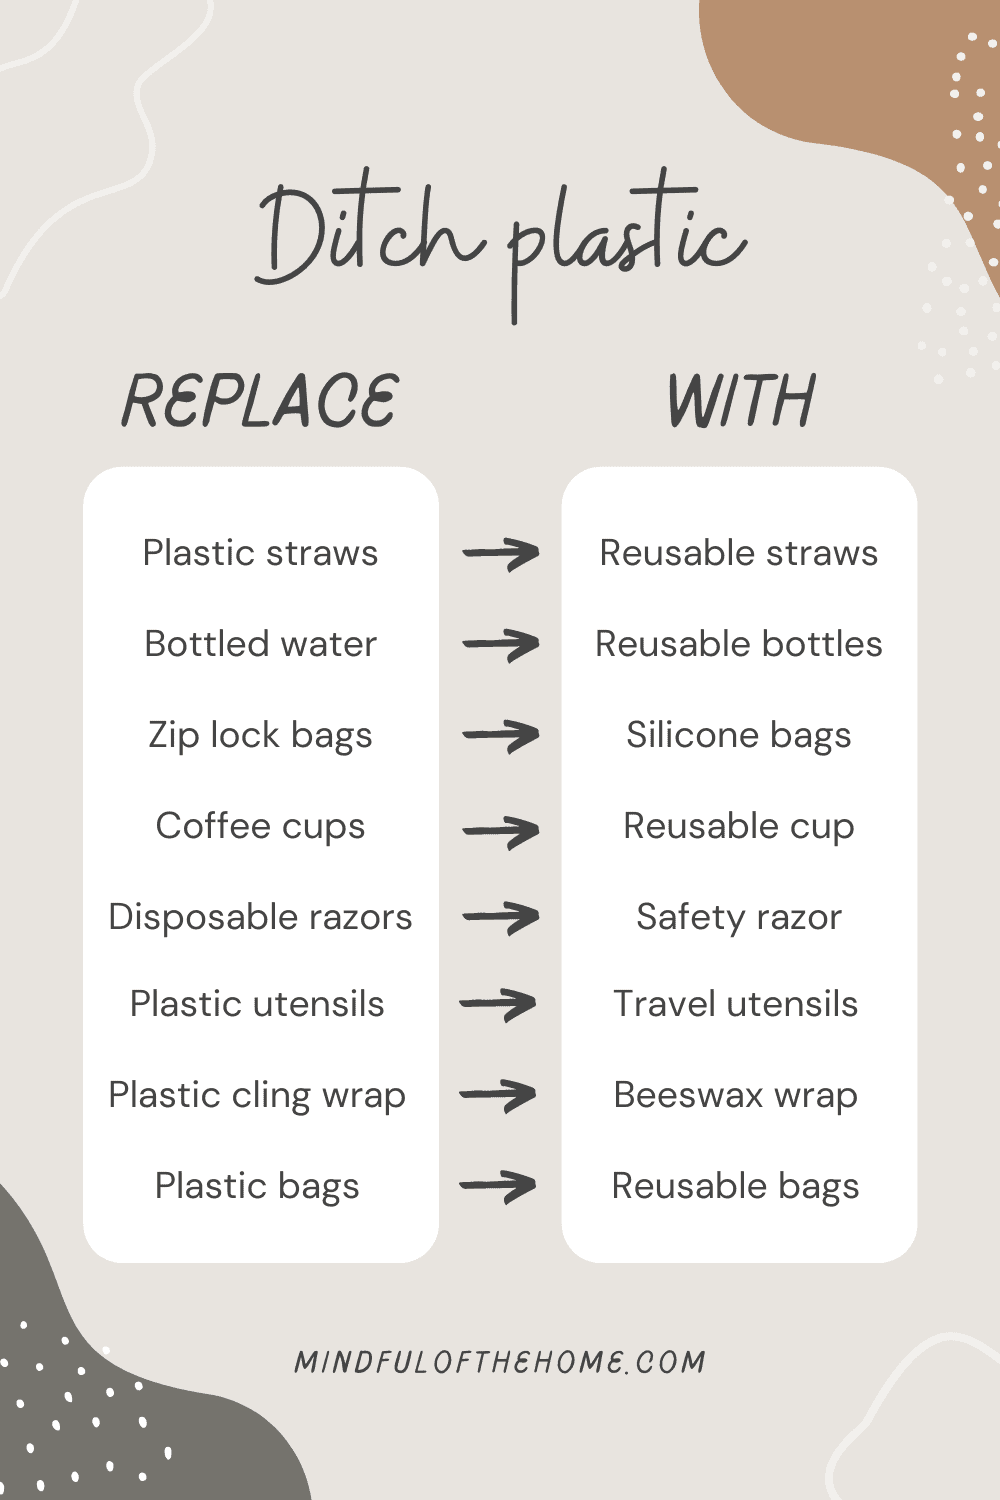 https://mindfulofthehome.com/wp-content/uploads/2021/04/ditch-plastic-replace-with-1000x1500.png